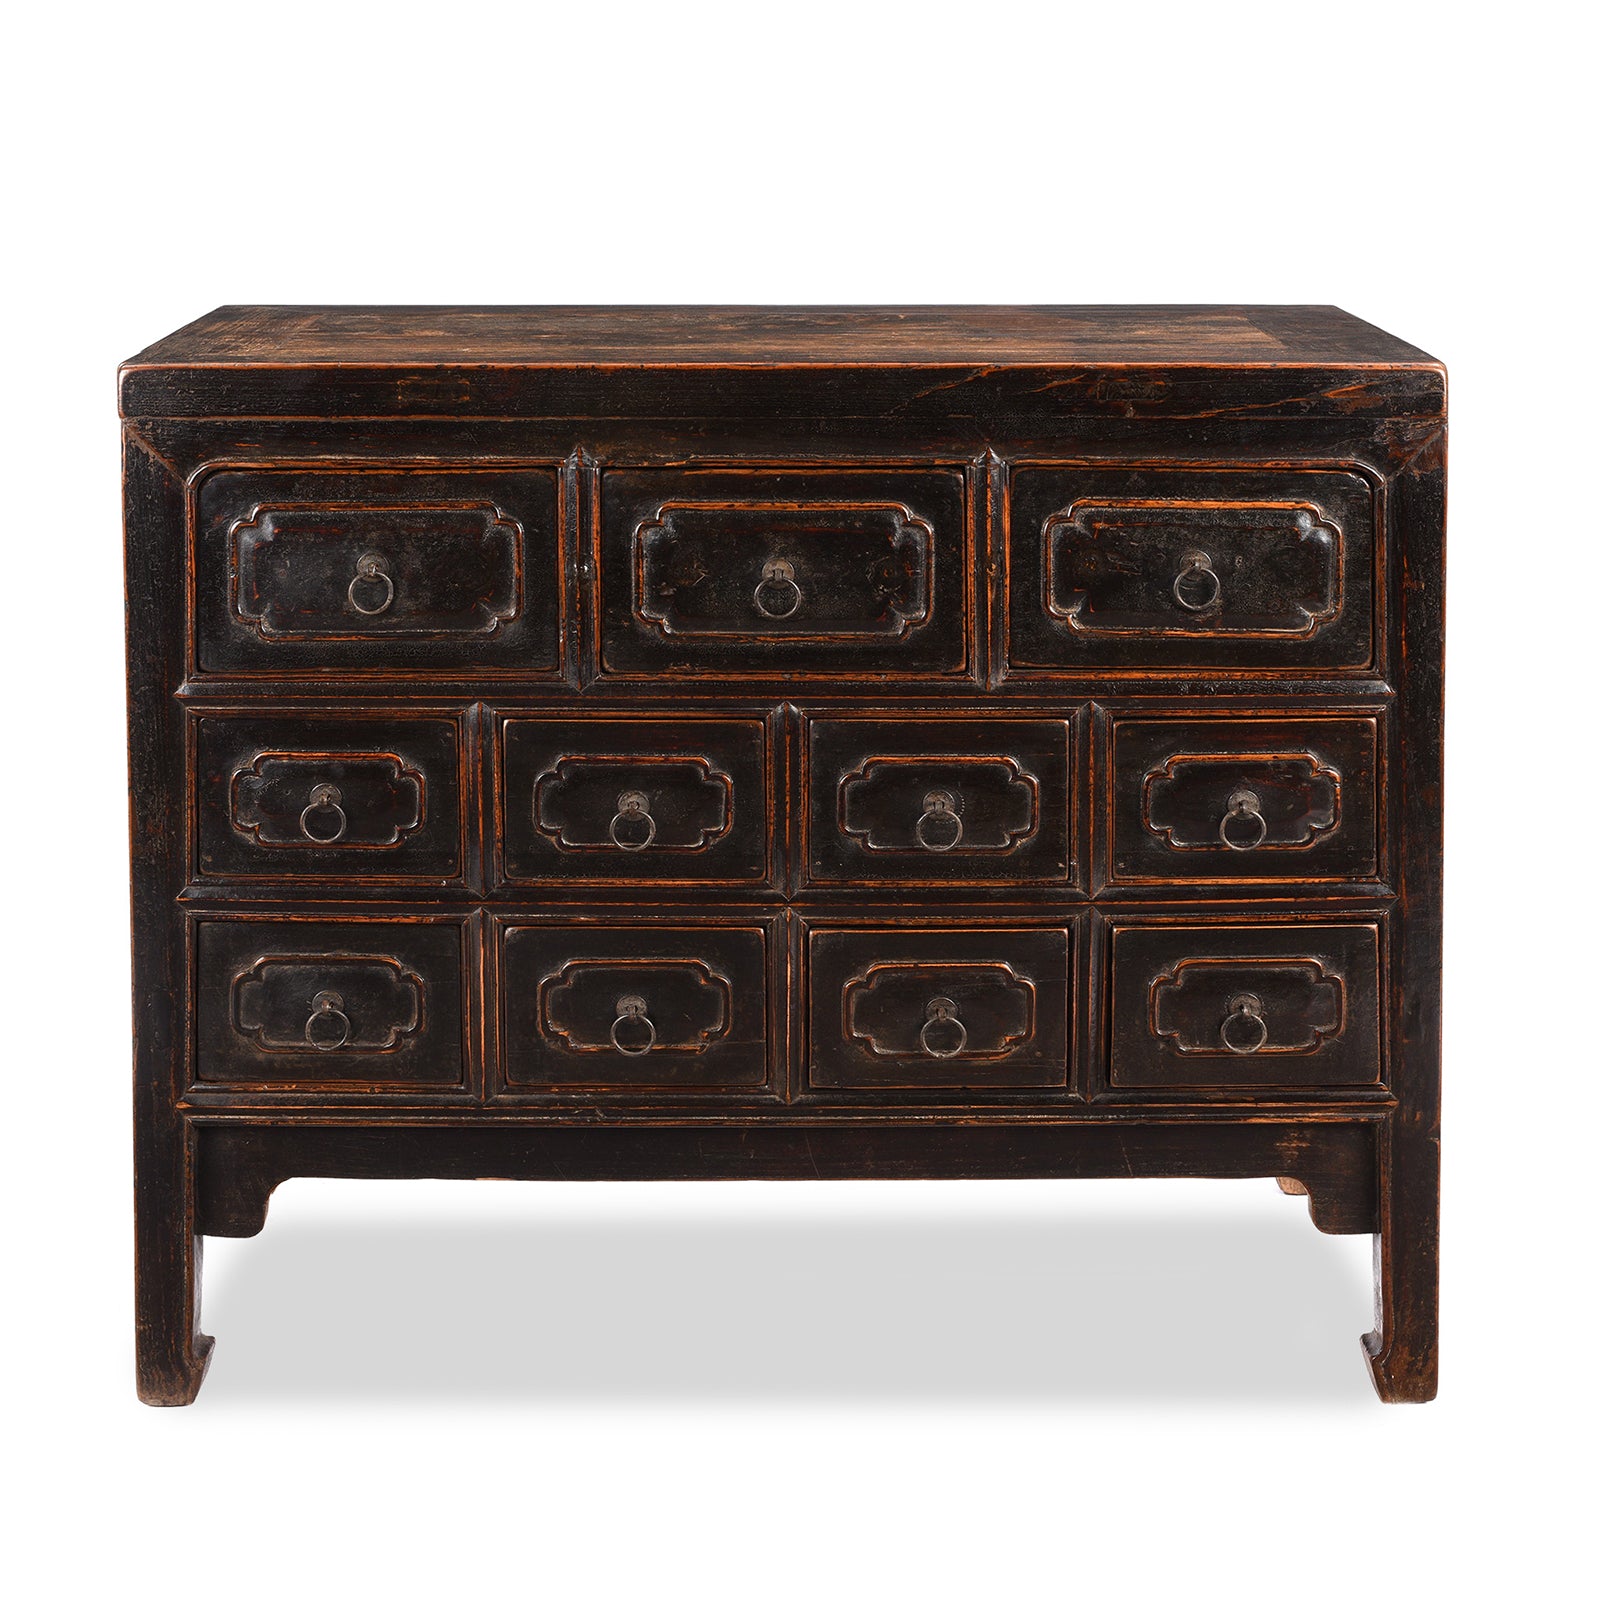 Antique Black Chest Of Drawers From Provincial Shanxi | Indigo Antiques